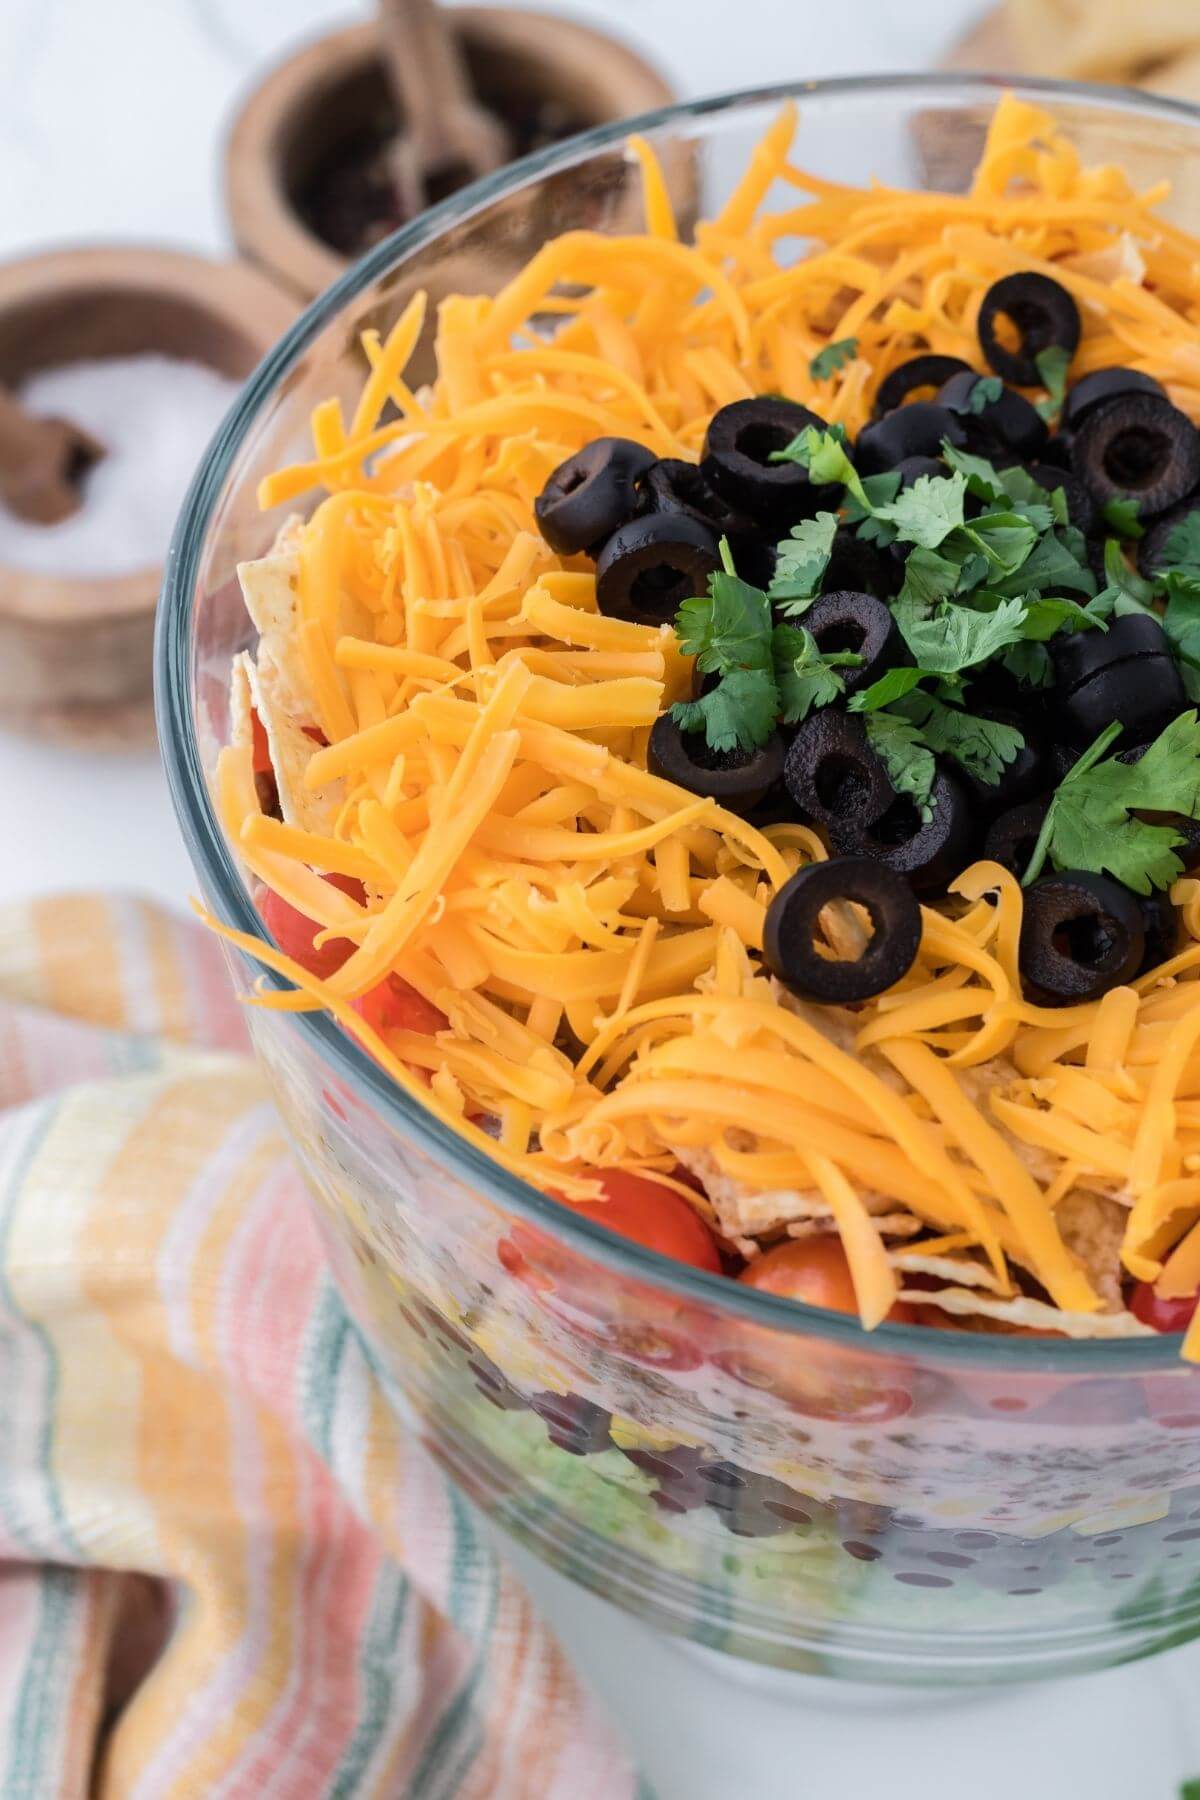 A colorful striped cloth sits next to a deep glass bowl of salad layers topped with shredded cheese.